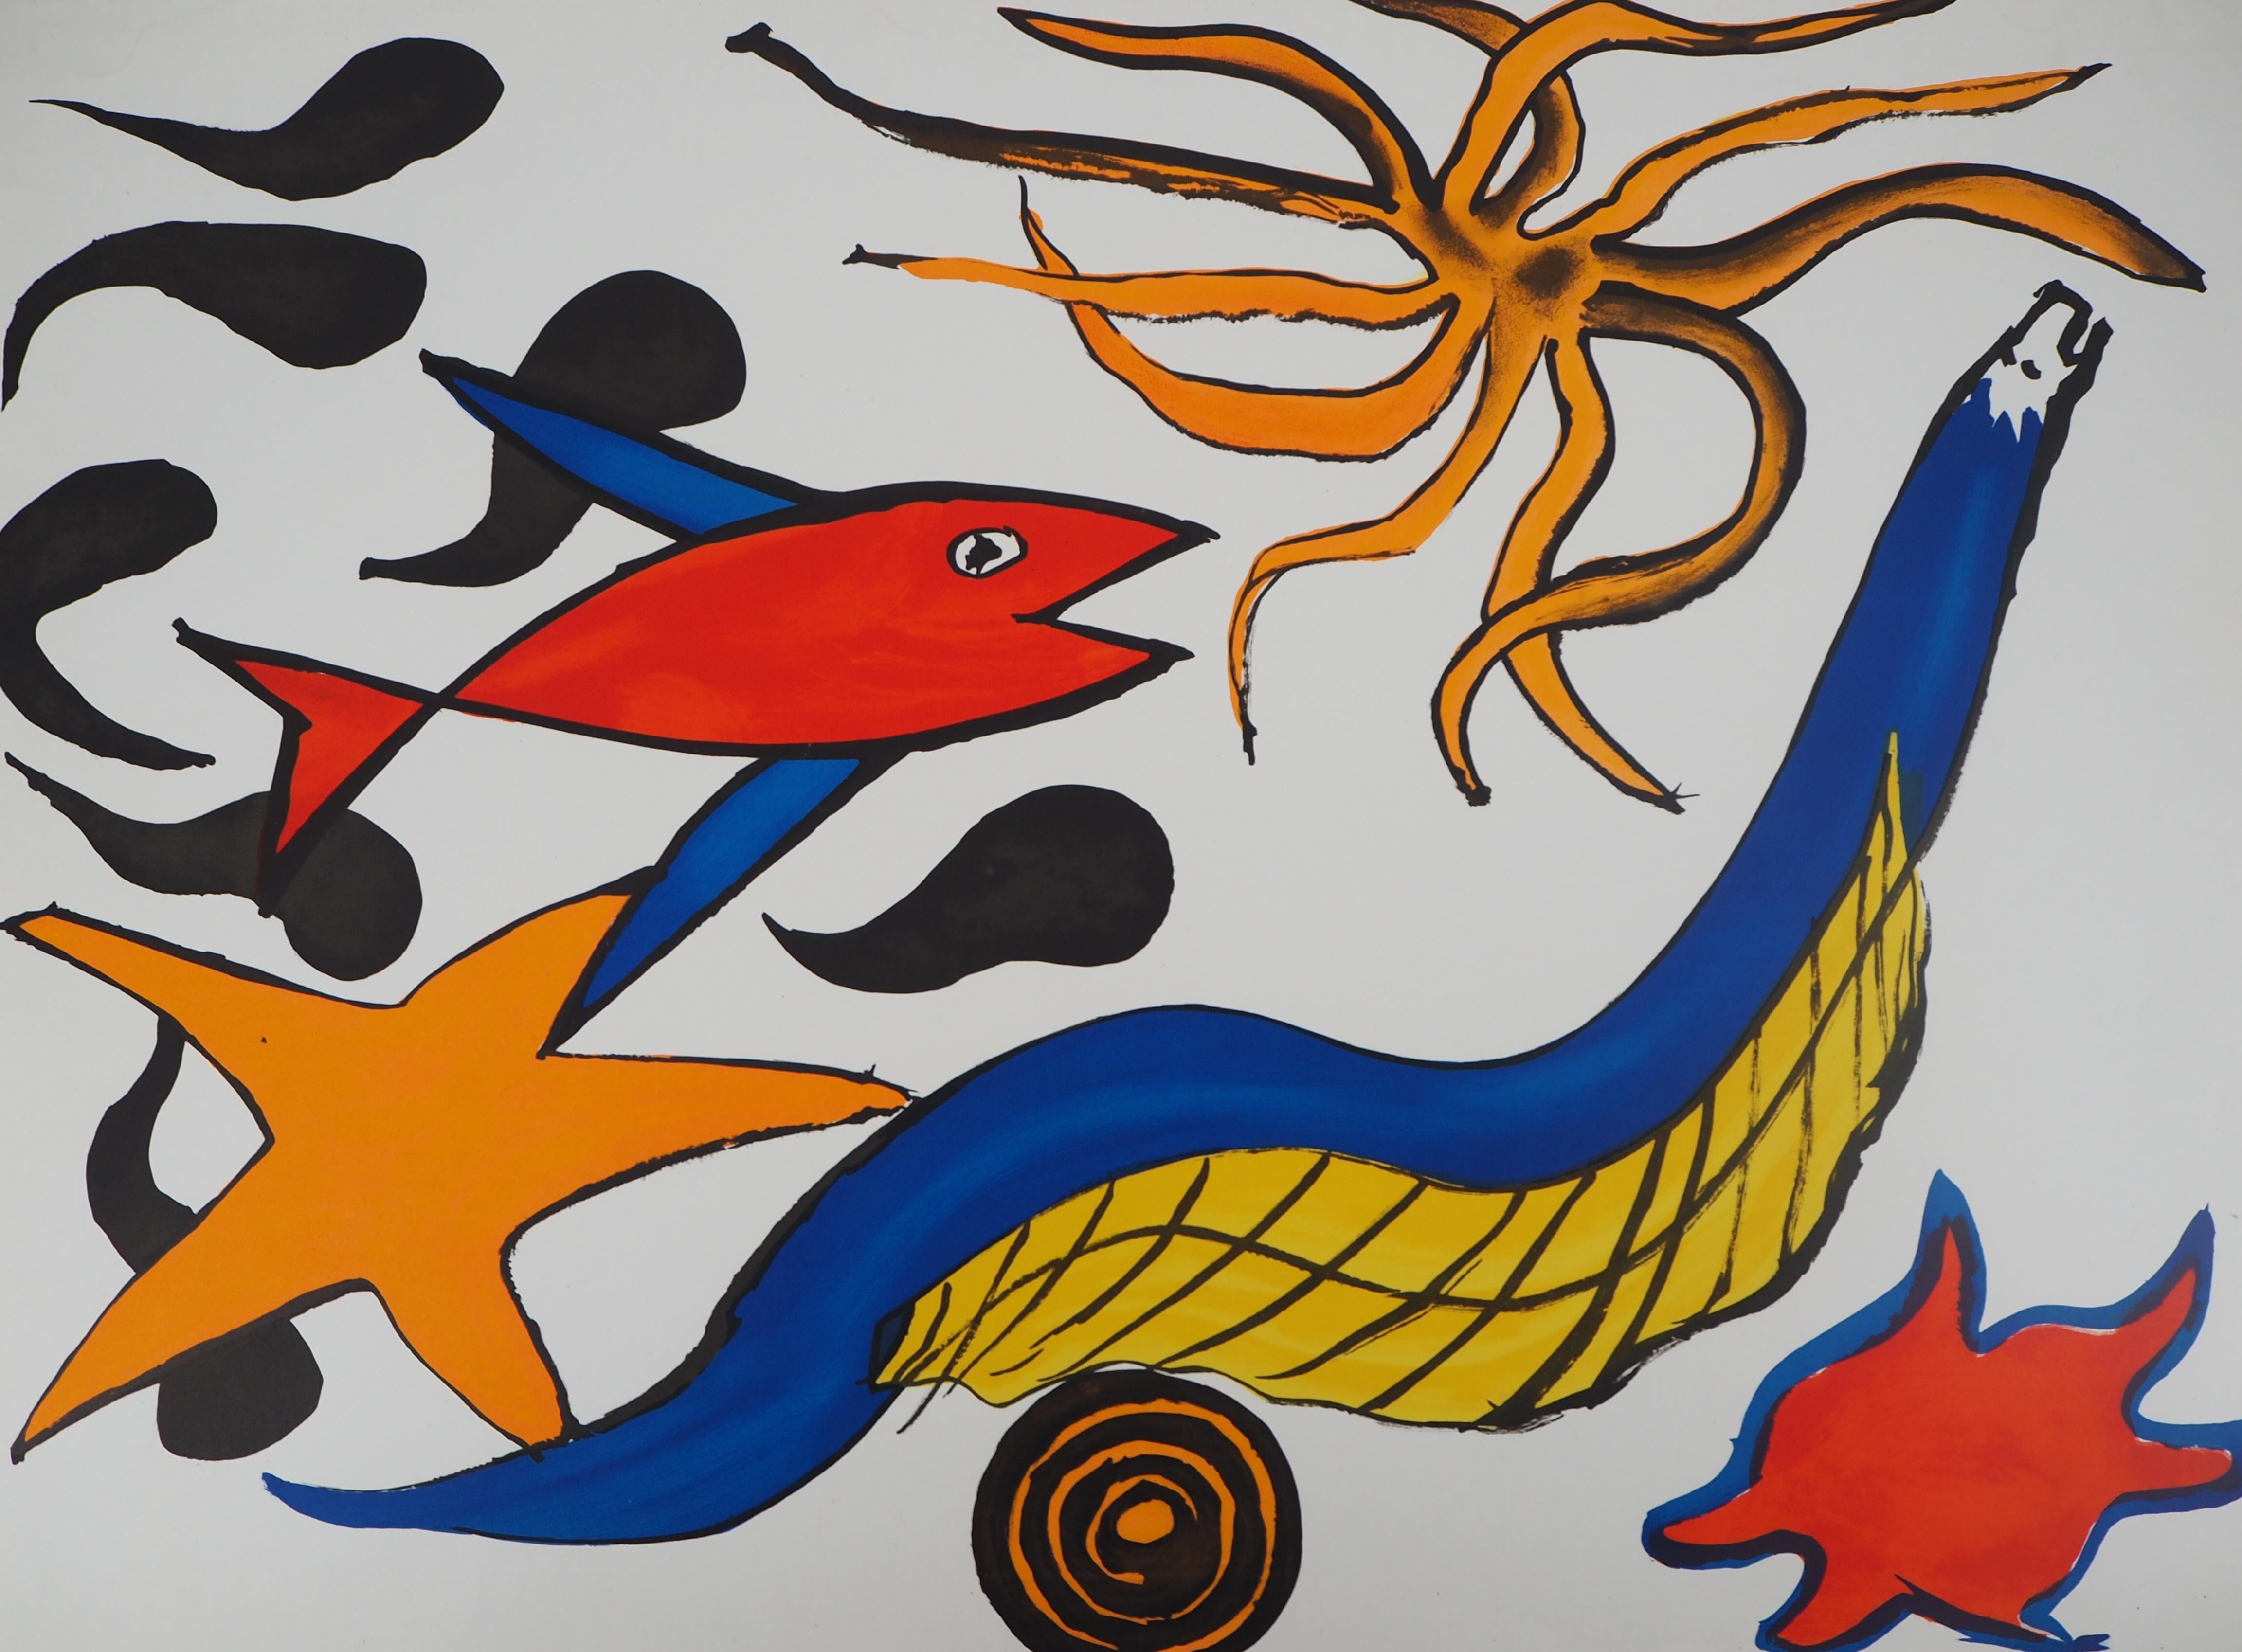 Our Unfinished Revolution - Lithograph - Print by Alexander Calder